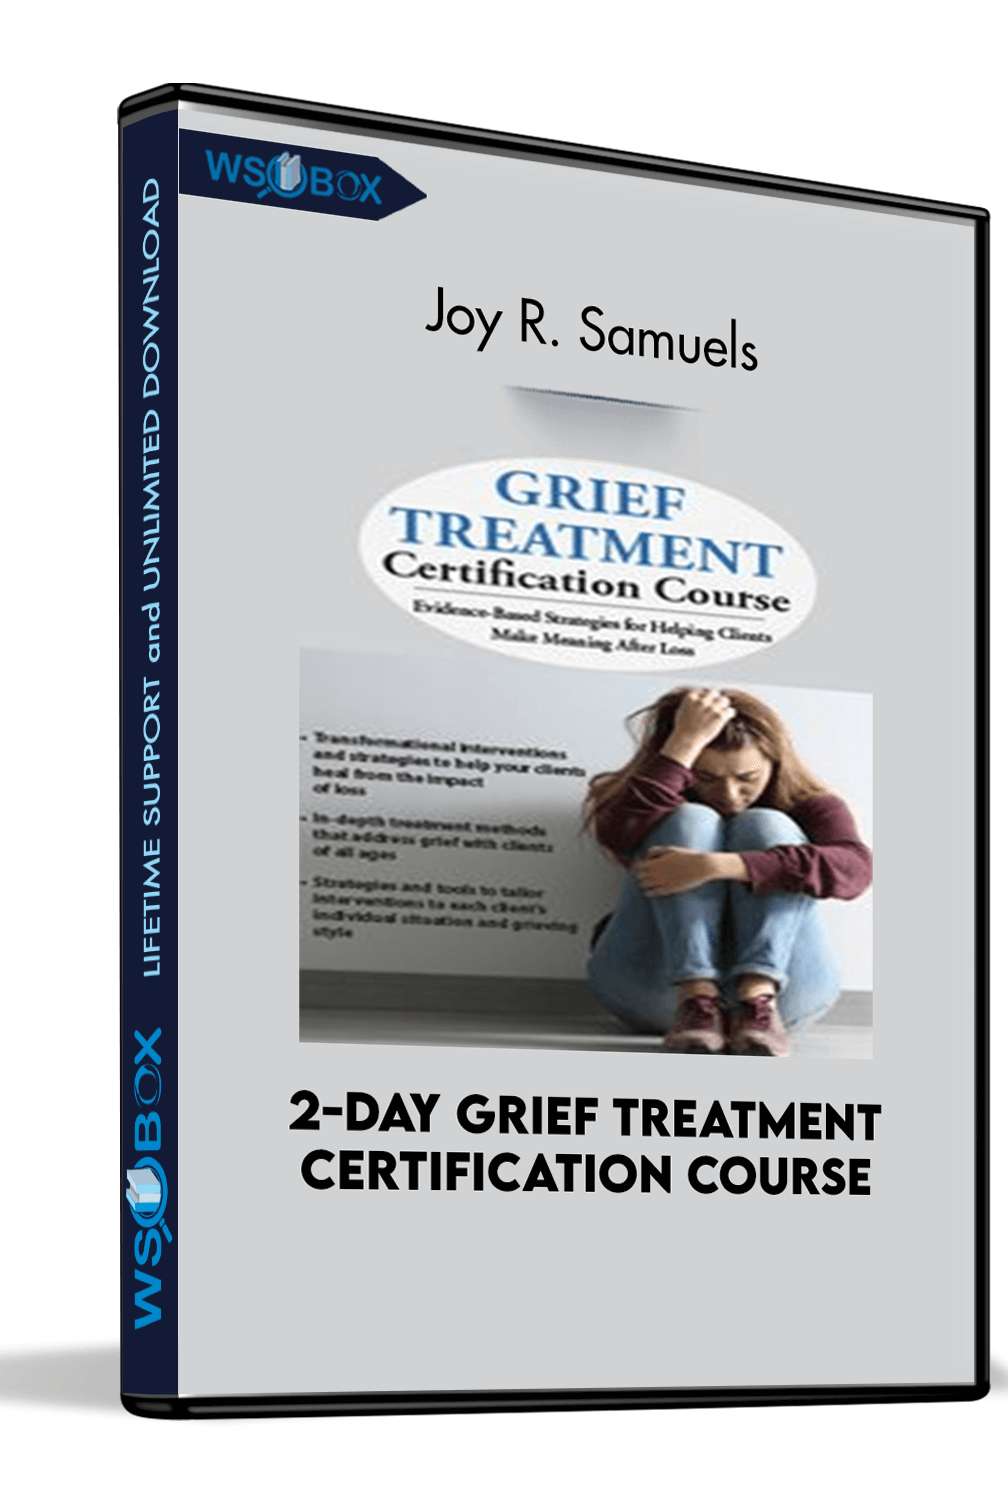 2-Day Grief Treatment Certification Course: Evidence-Based Strategies for Helping Clients Make Meaning After Loss – Joy R. Samuels